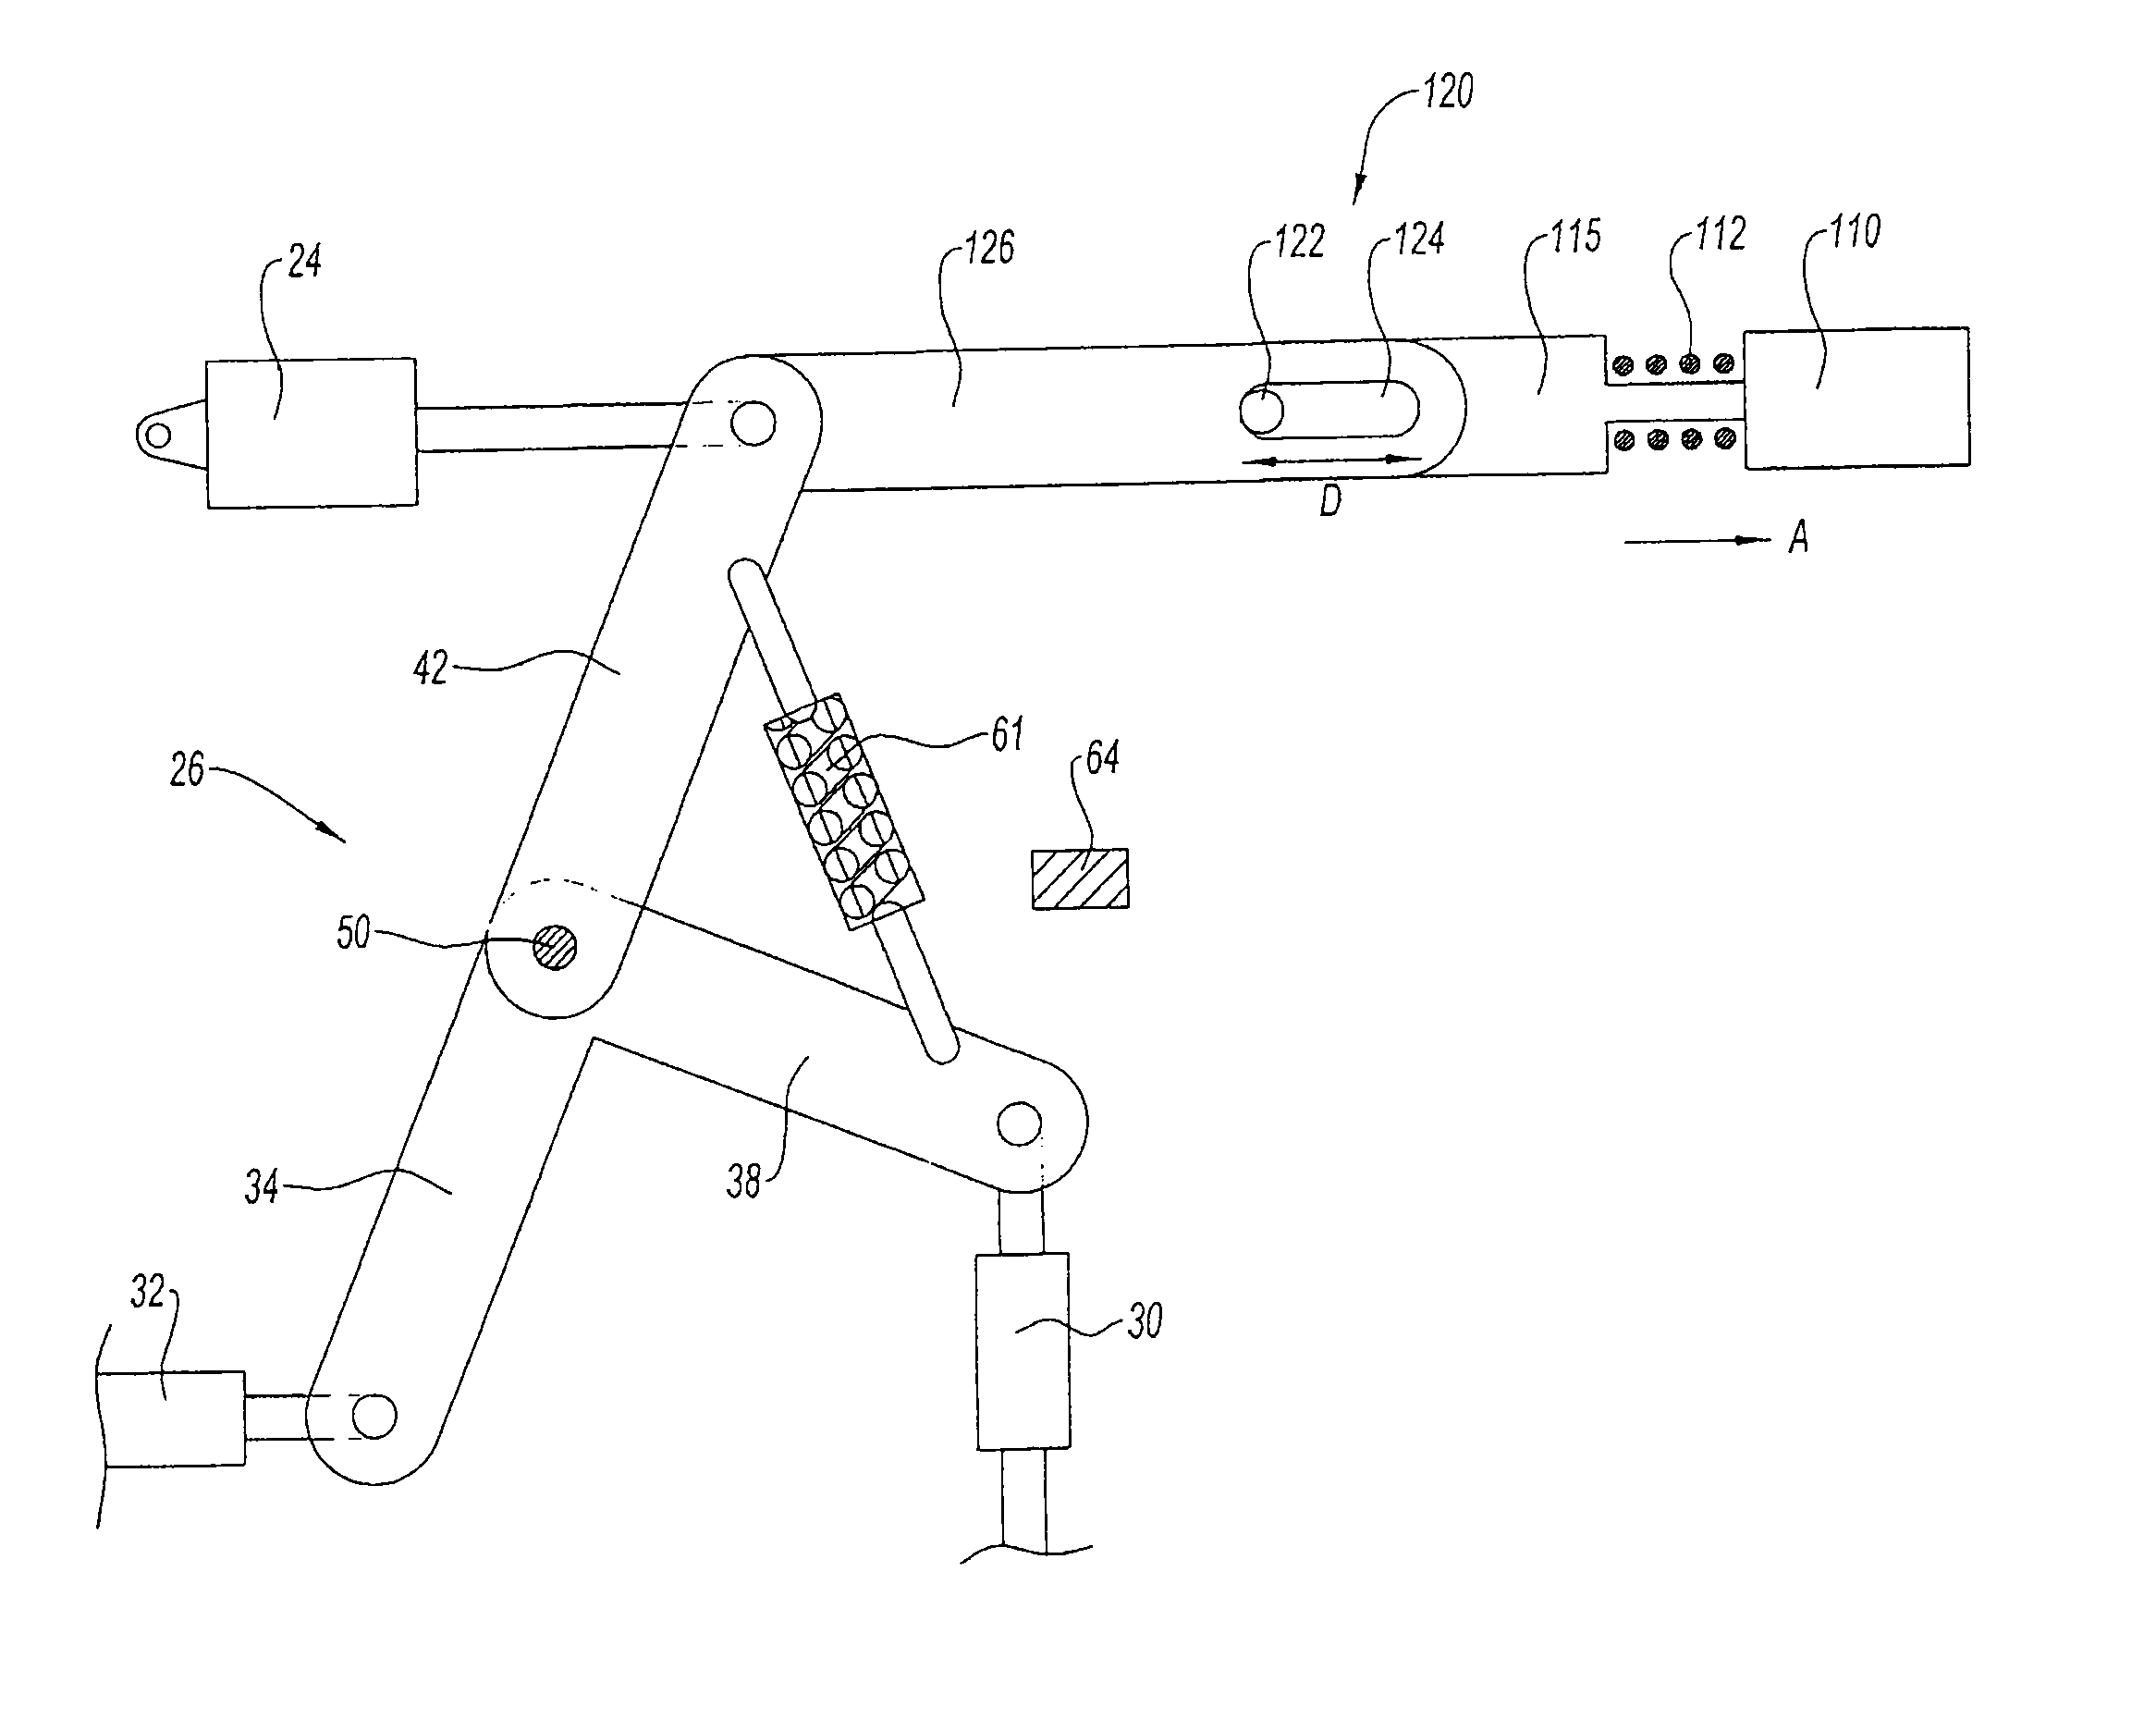 System for controlling variable-geometry equipments of a turbomachine, particularly by articulated bellcranks